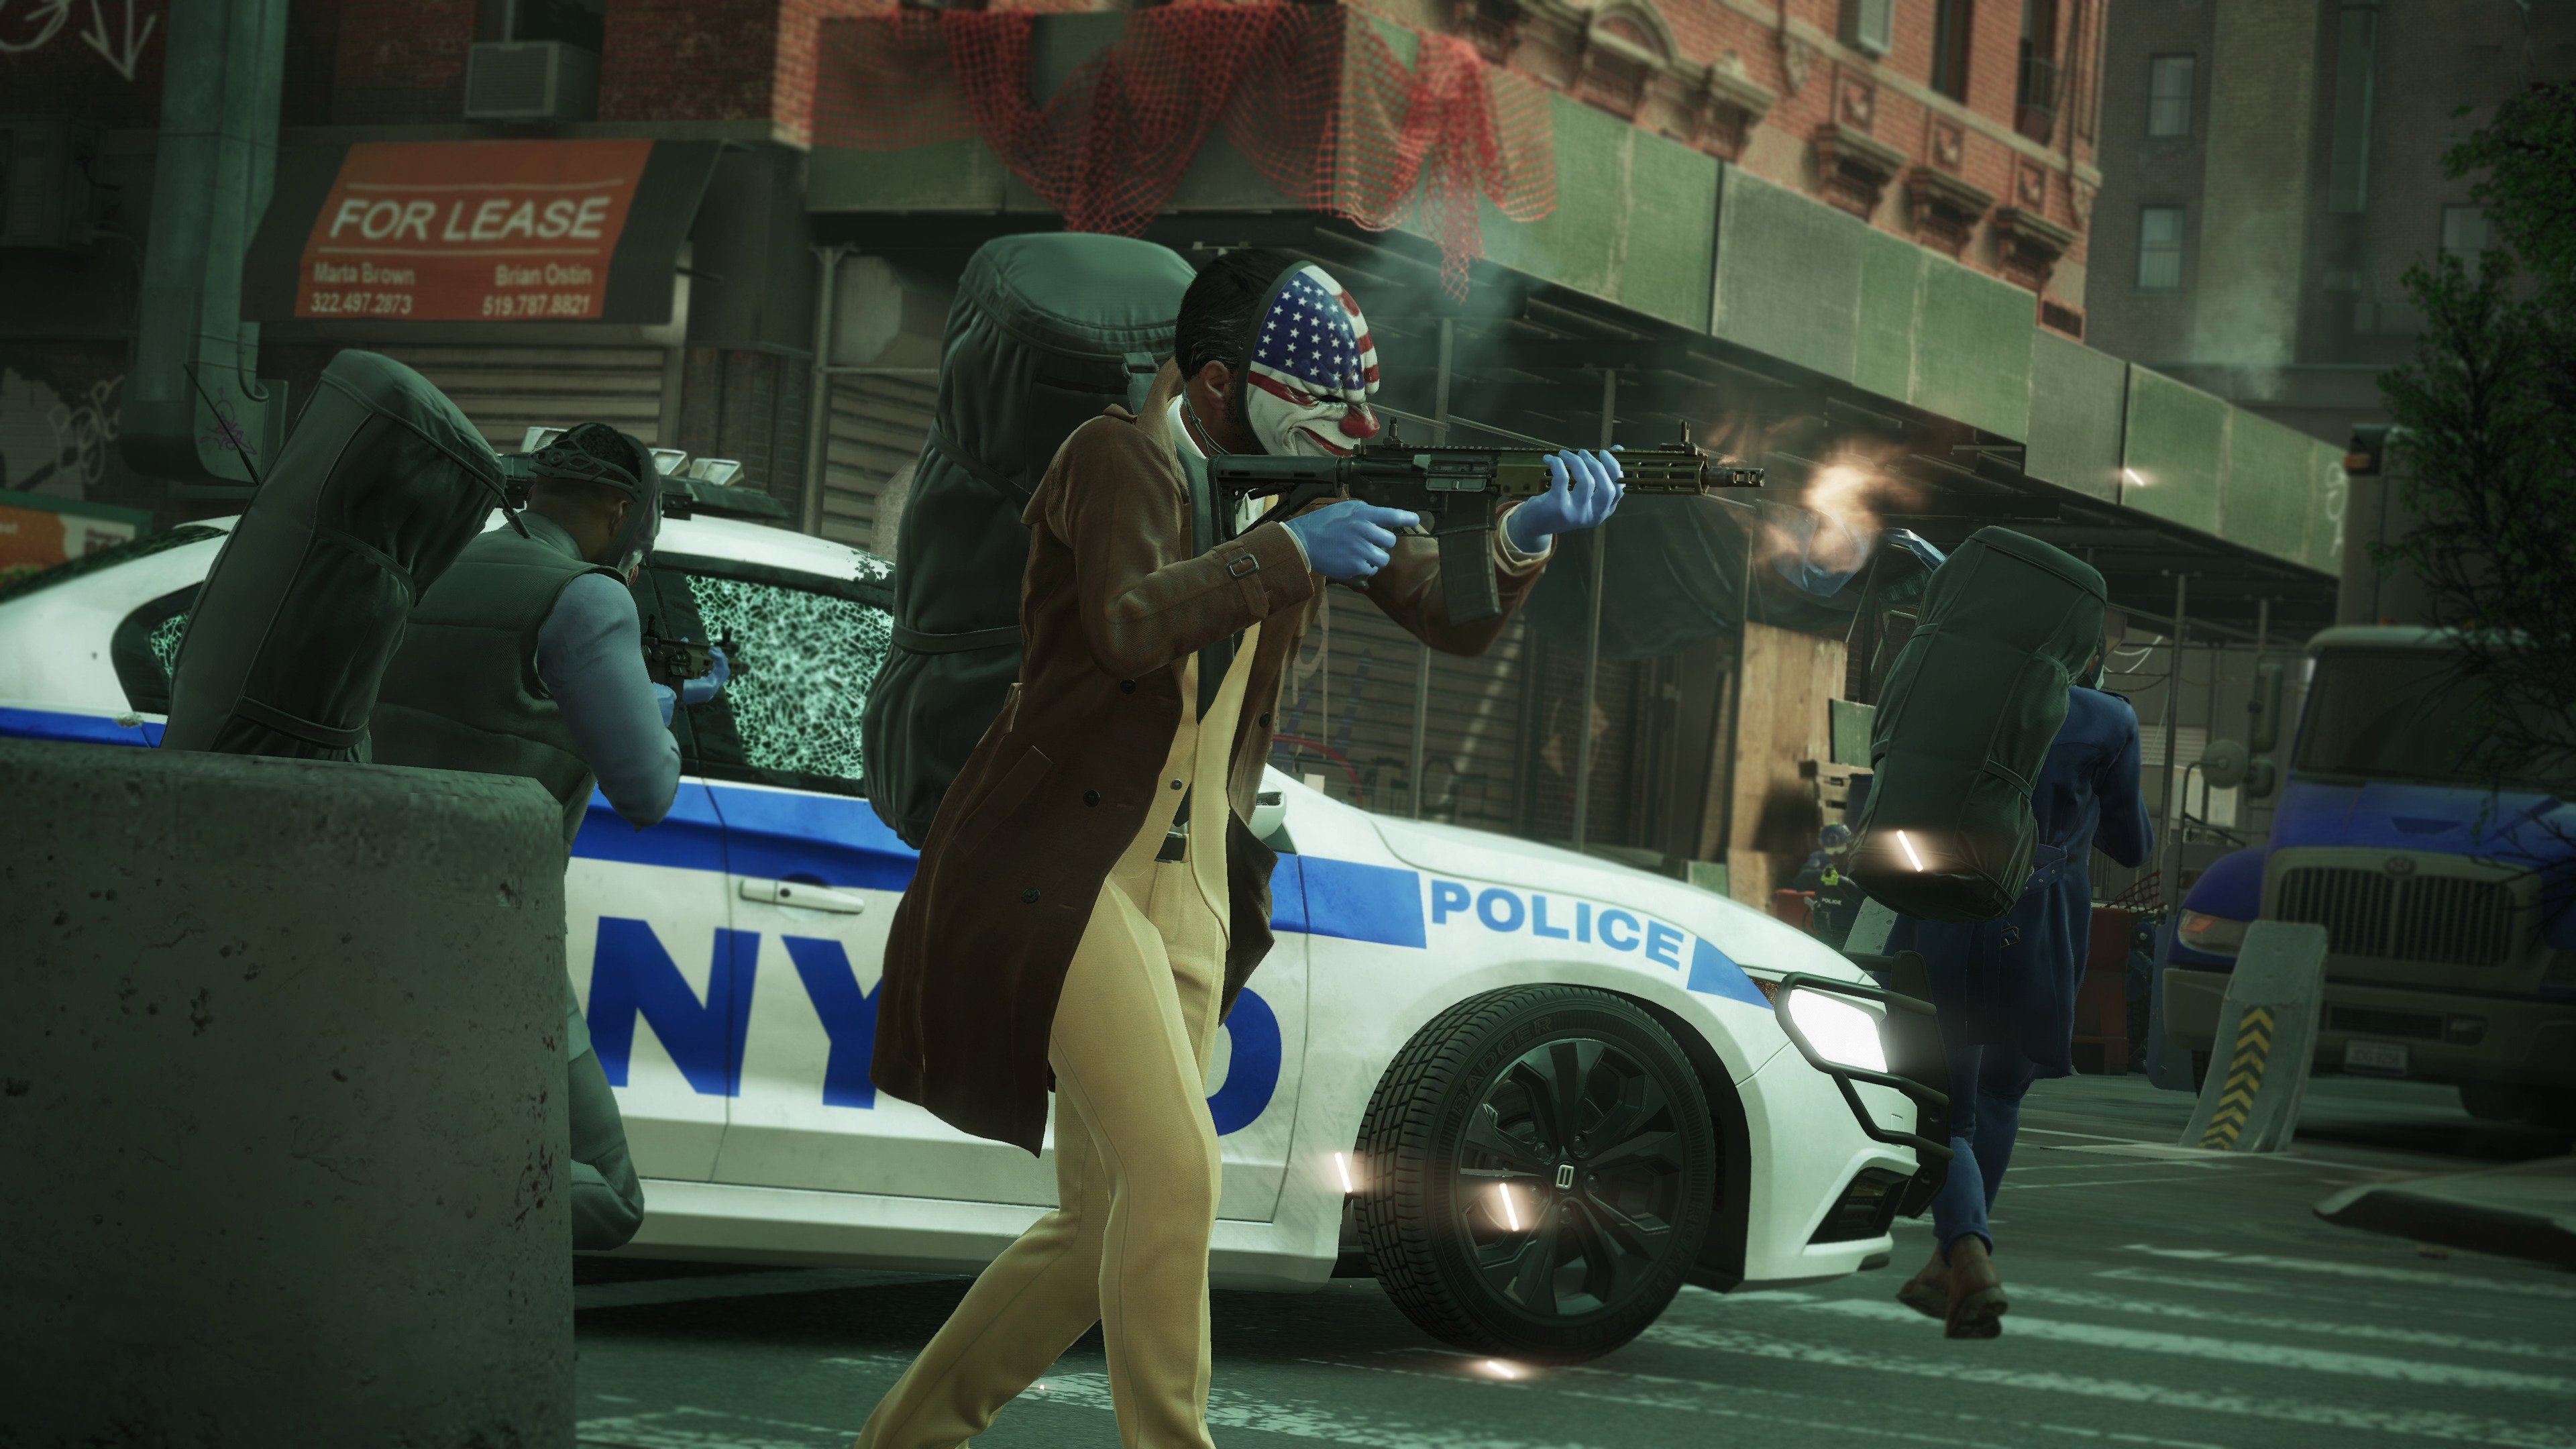 Will Payday 3 be on PS4 and Xbox One?